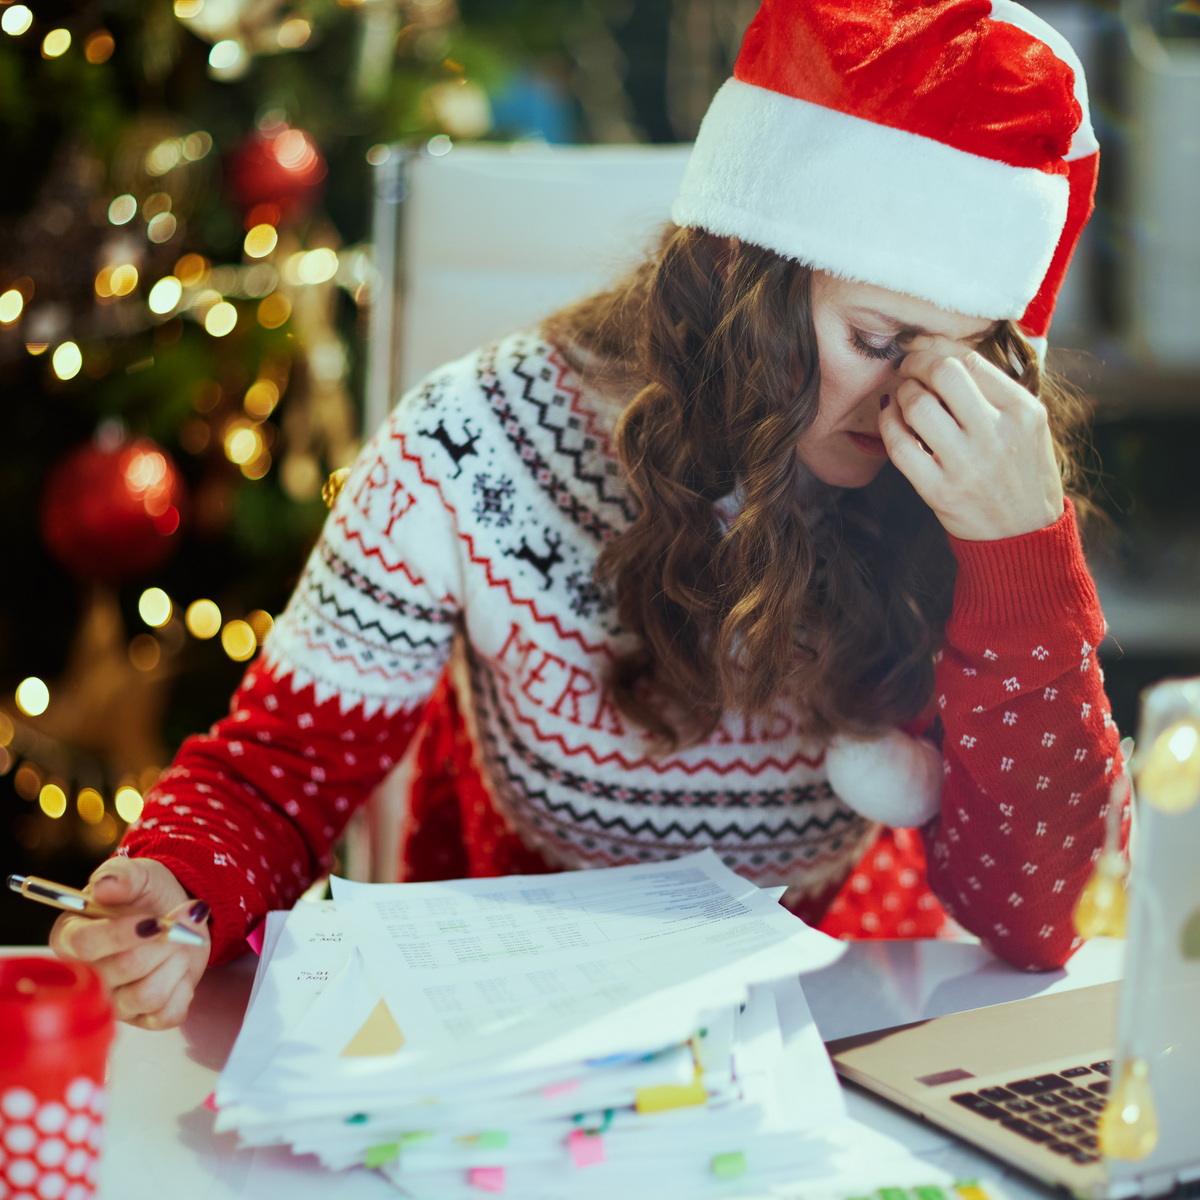 A business owner stressed over business slowing down over the holiday season partly due to not having a marketing strategy or working on her business's Local SEO